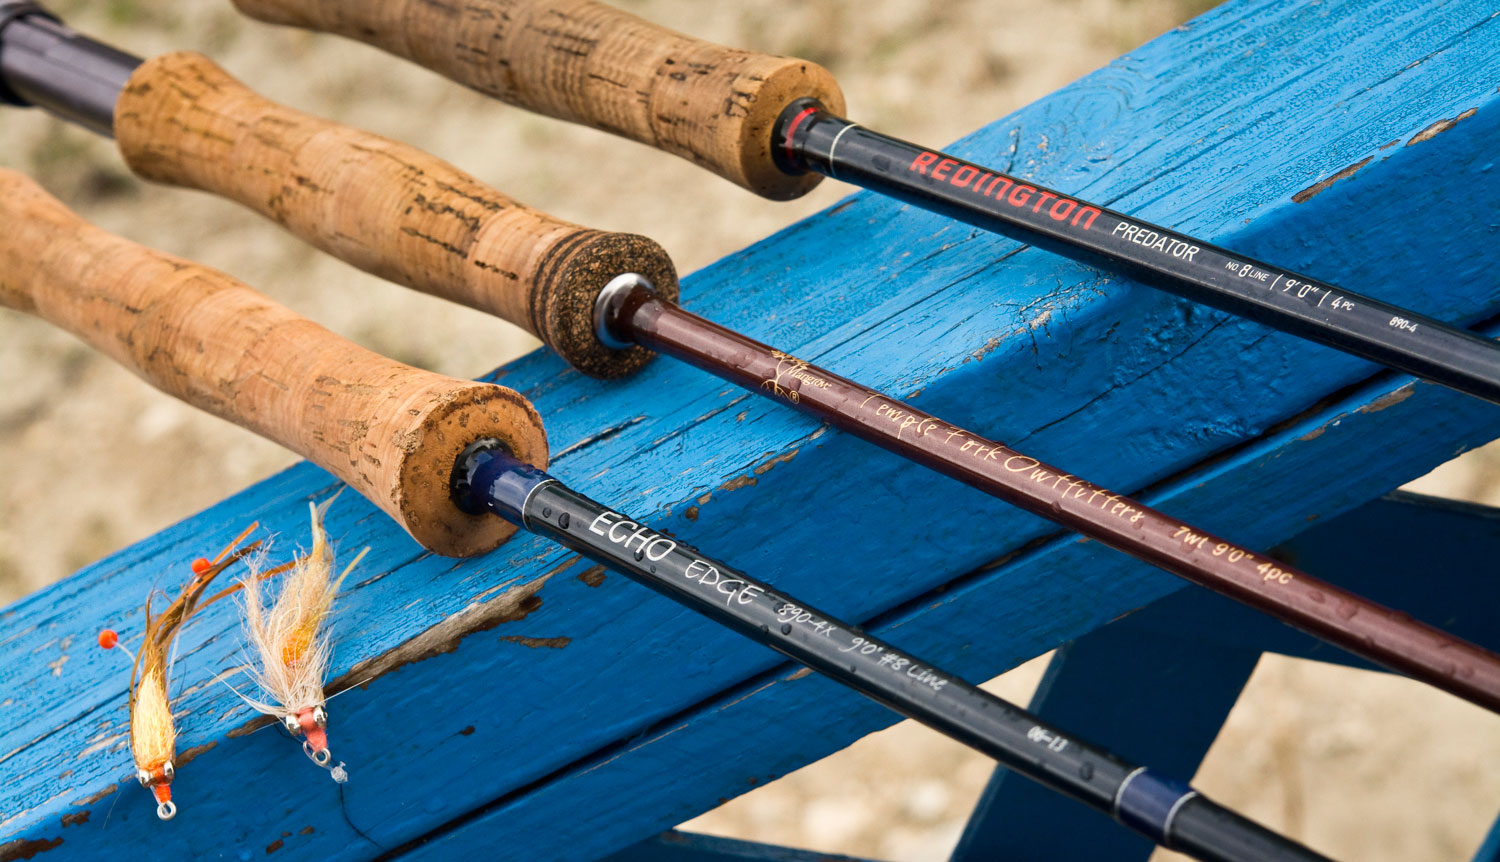 saltwater fly rods - Fly Fishing, Gink and Gasoline, How to Fly Fish, Trout Fishing, Fly Tying